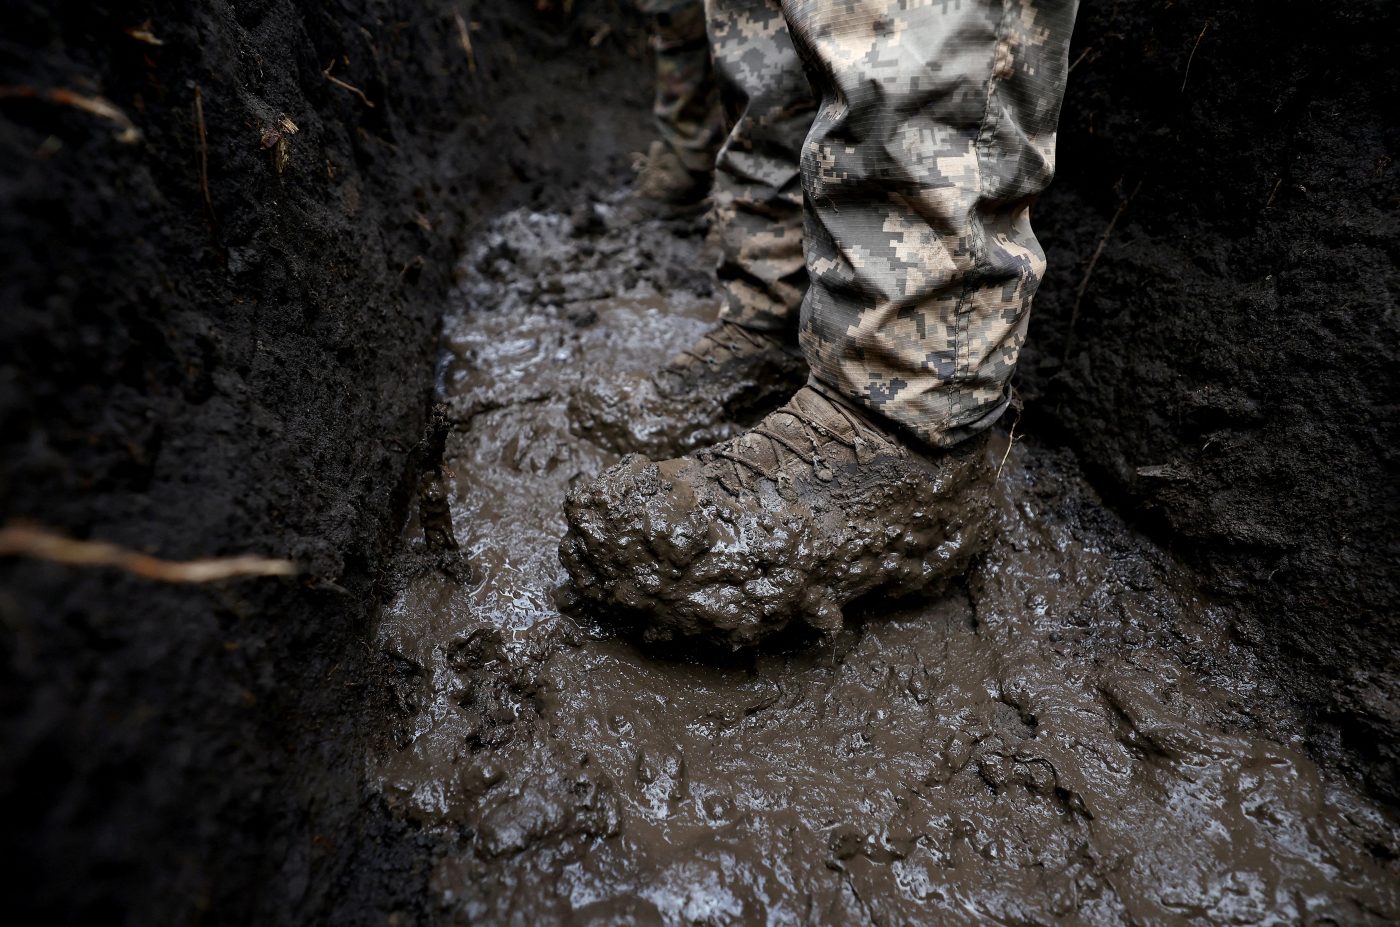 Photo: A Ukrainian serviceman of a fire platoon stands in mud in a trench near the frontline, as Russia's attack on Ukraine continues, in Donetsk region, Ukraine February 27, 2023. Credit: REUTERS/Lisi Niesner